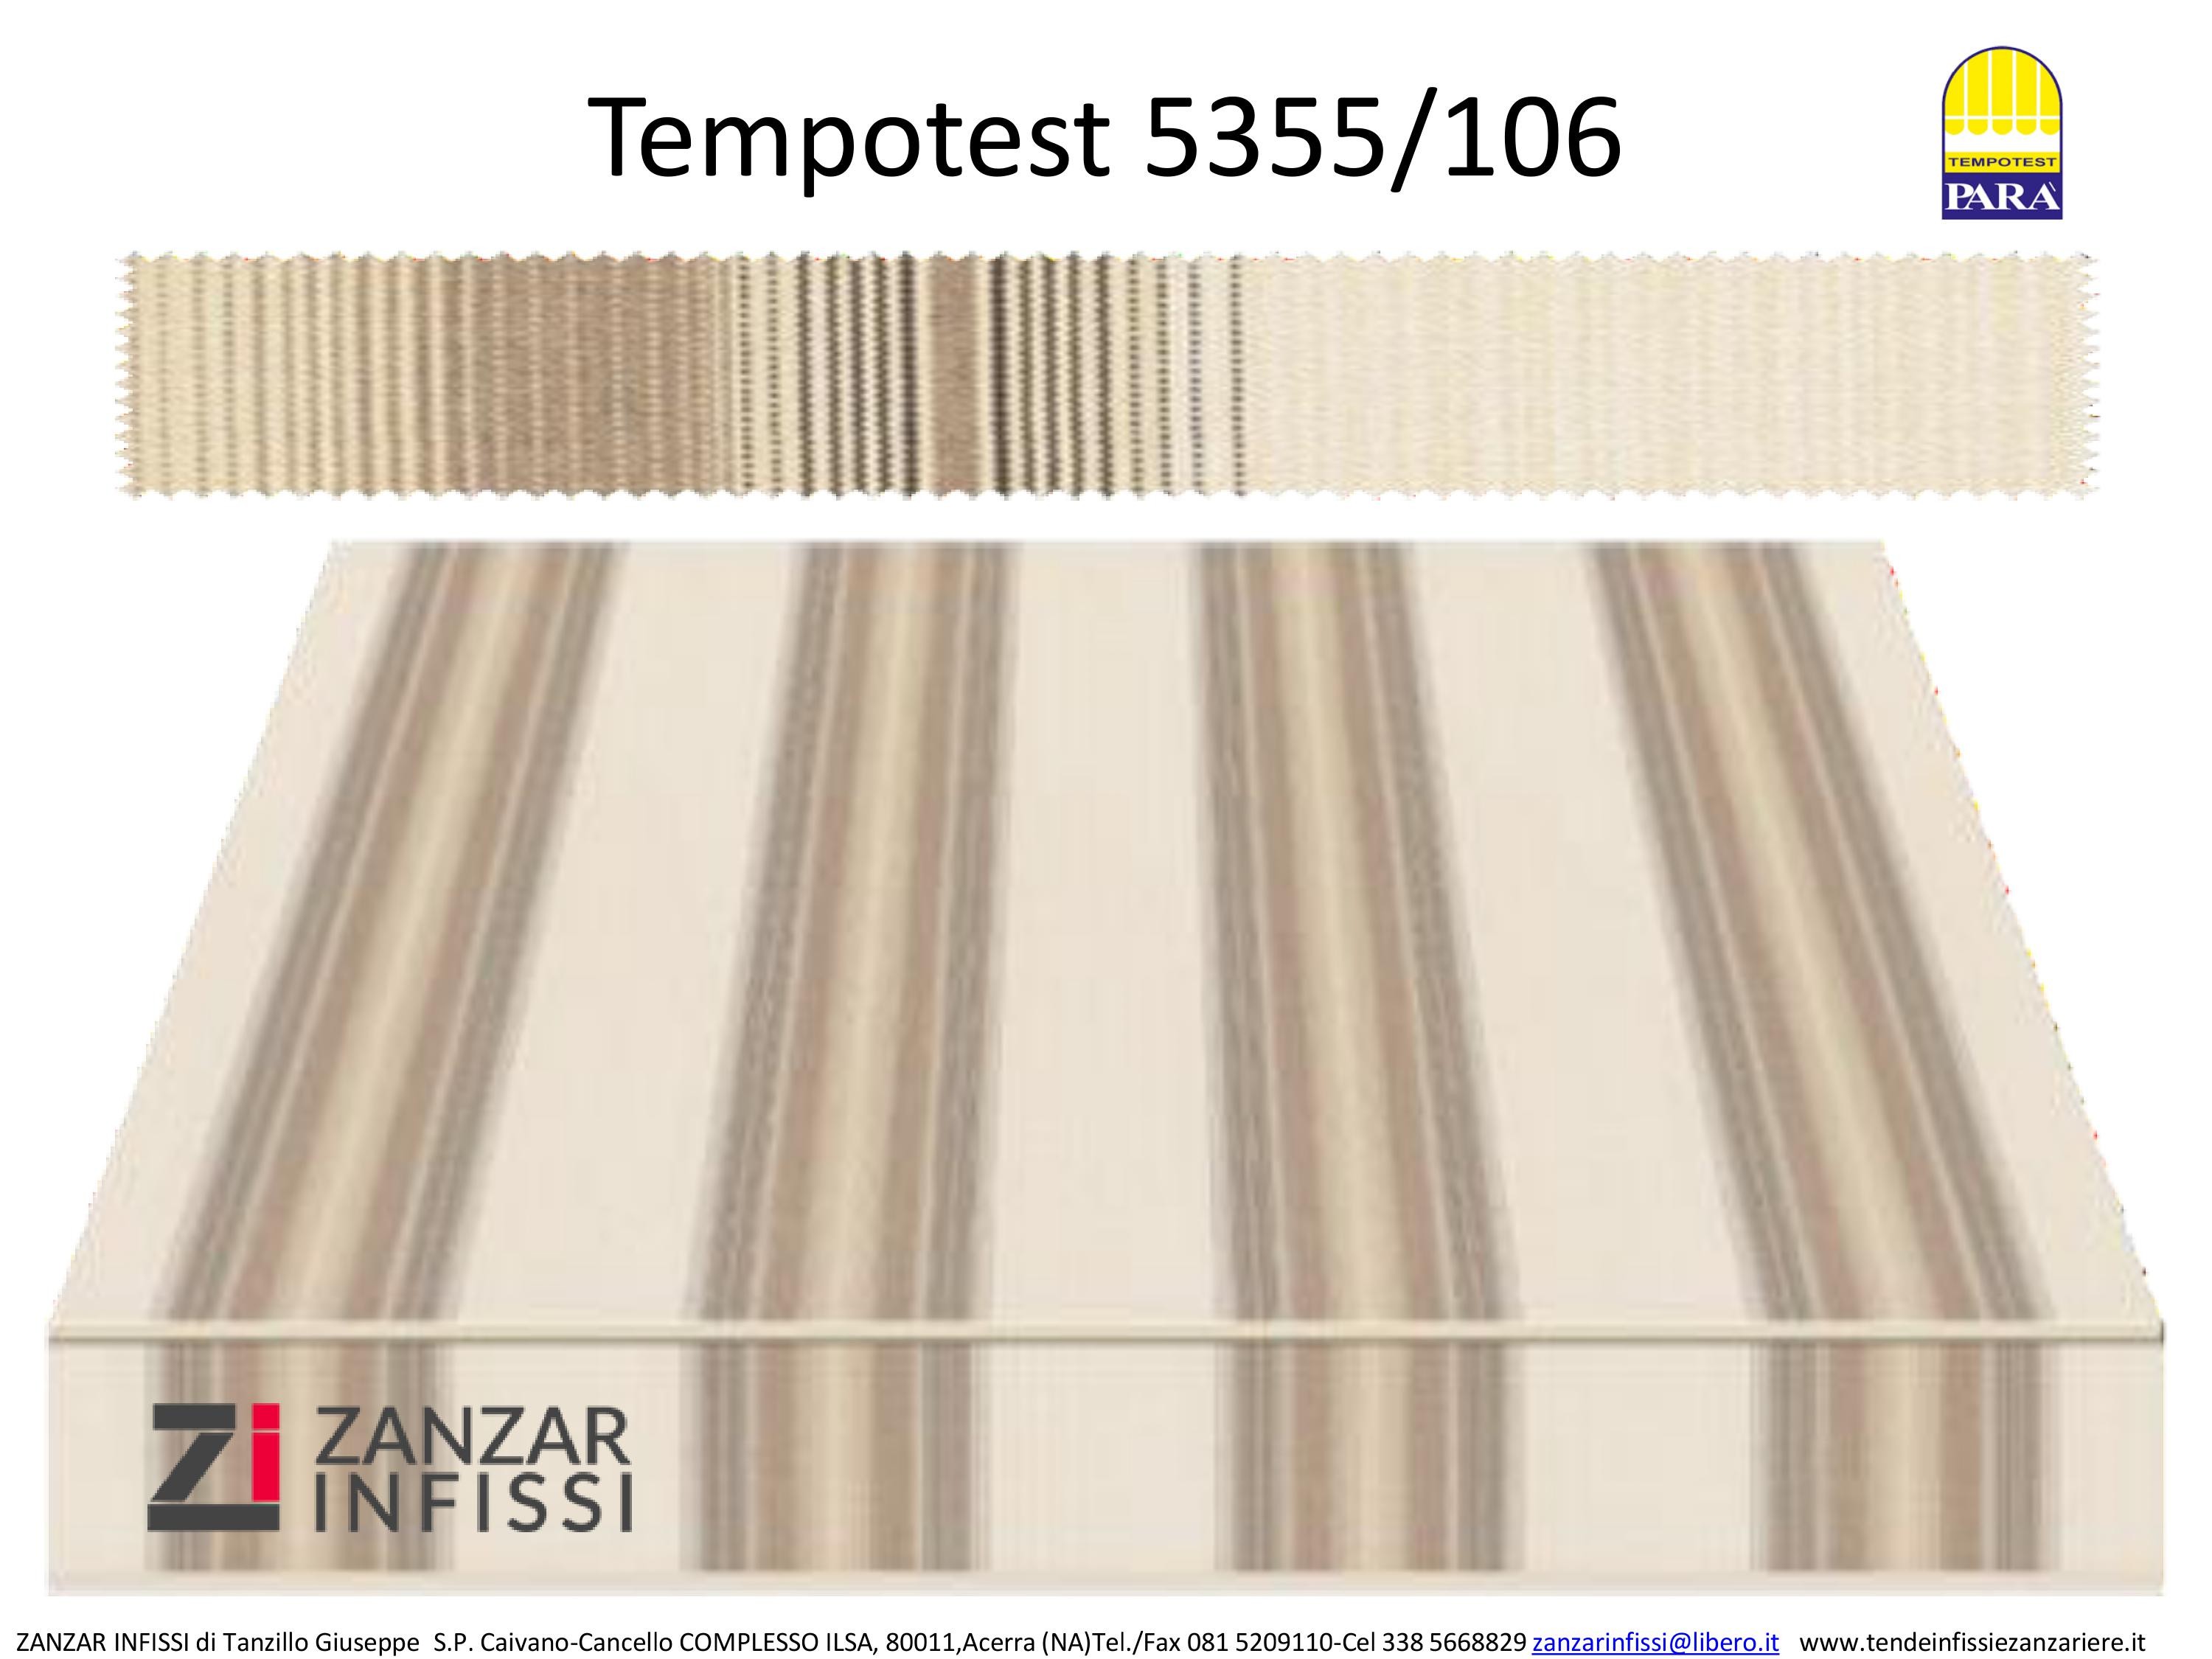 Tempotest 5355/106